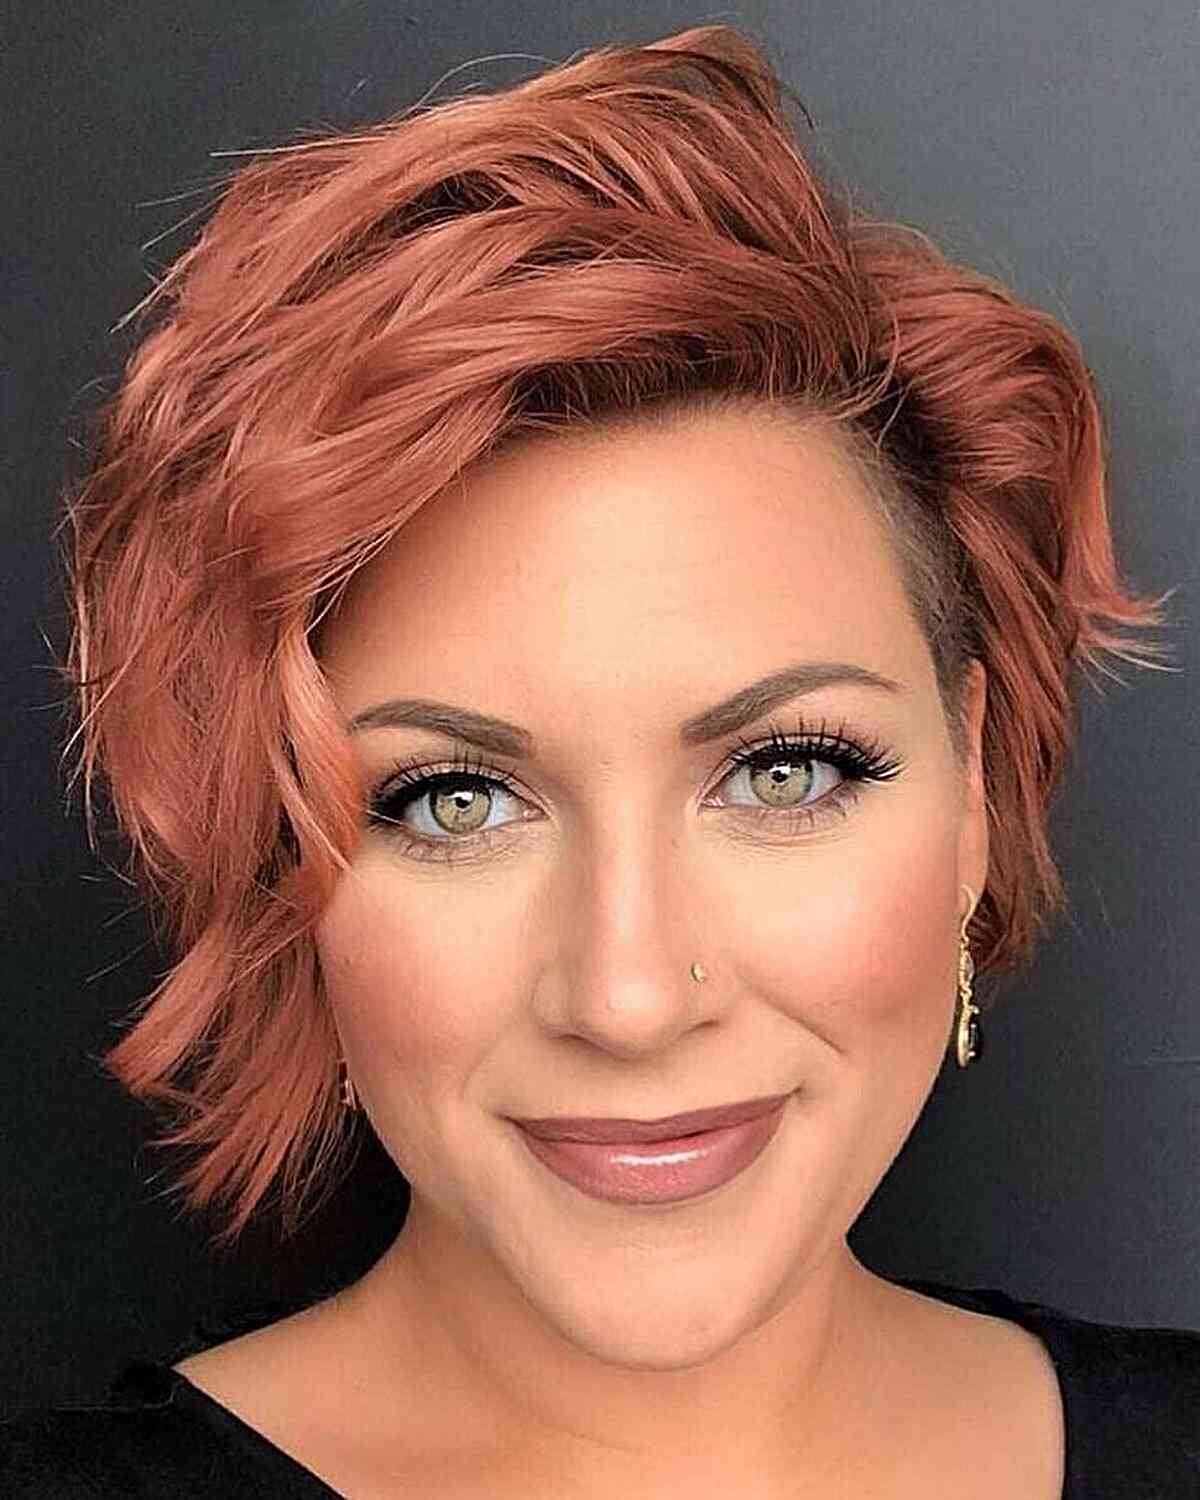 Short Wavy Disconnection Hair for Women Aged 40